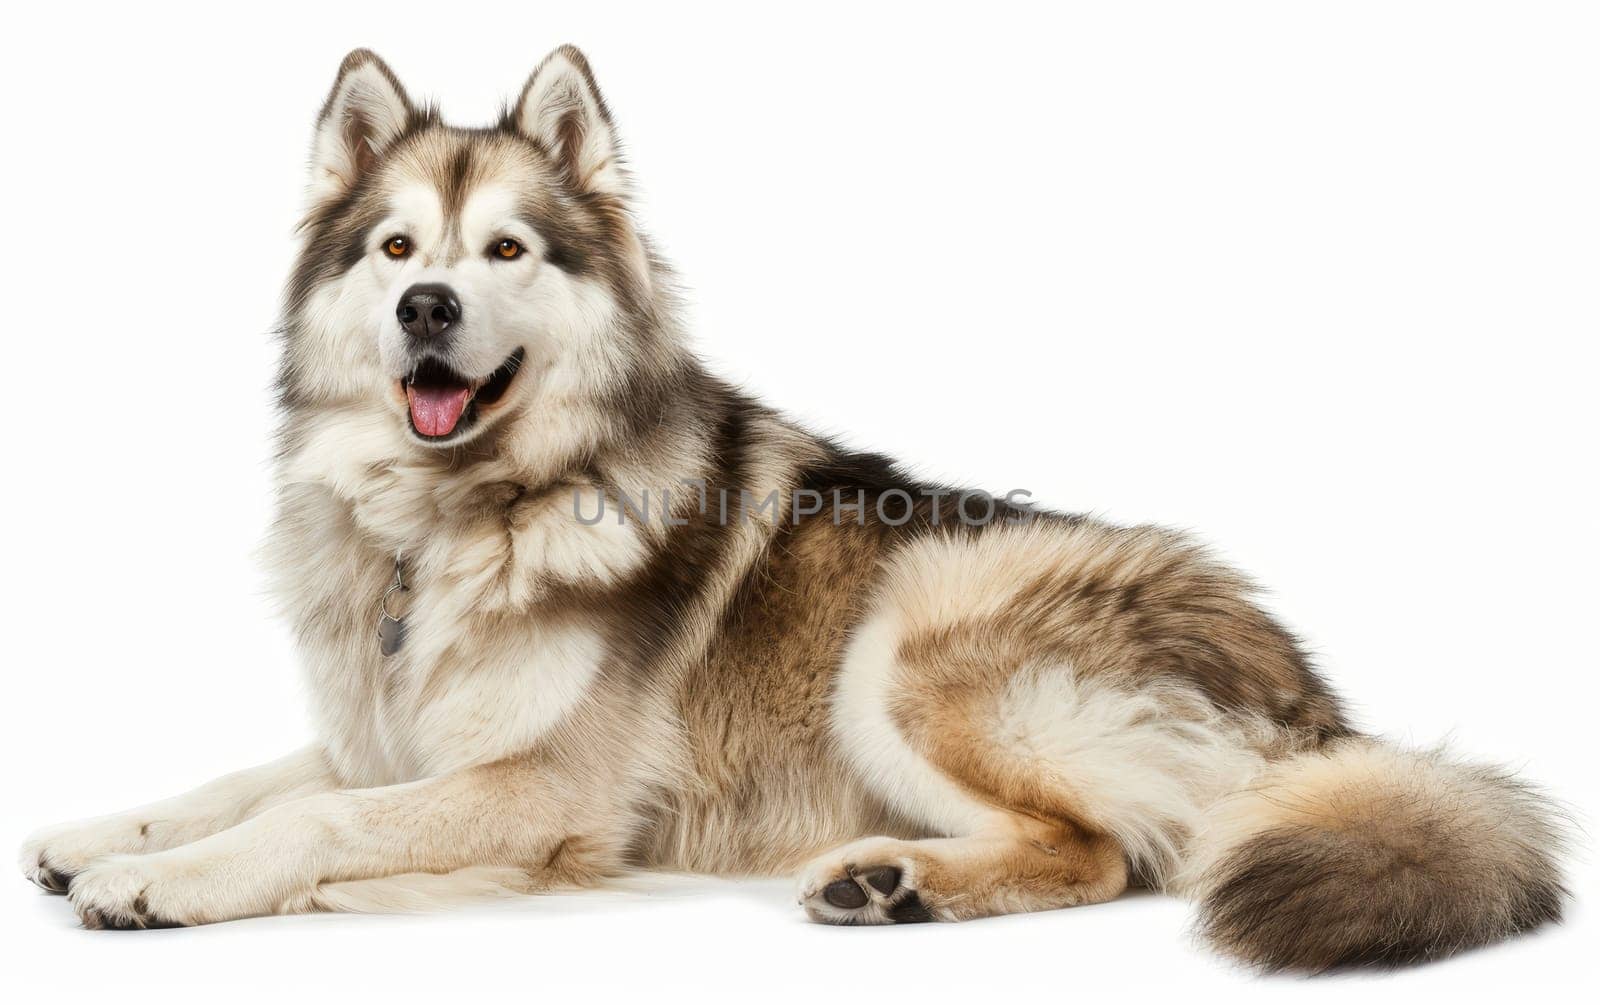 An exuberant Alaskan Malamute sits attentively, its tongue out in a happy pant and eyes sparkling with joy. The robust build and lush coat highlight the breed's adaptability to cold climates. by sfinks